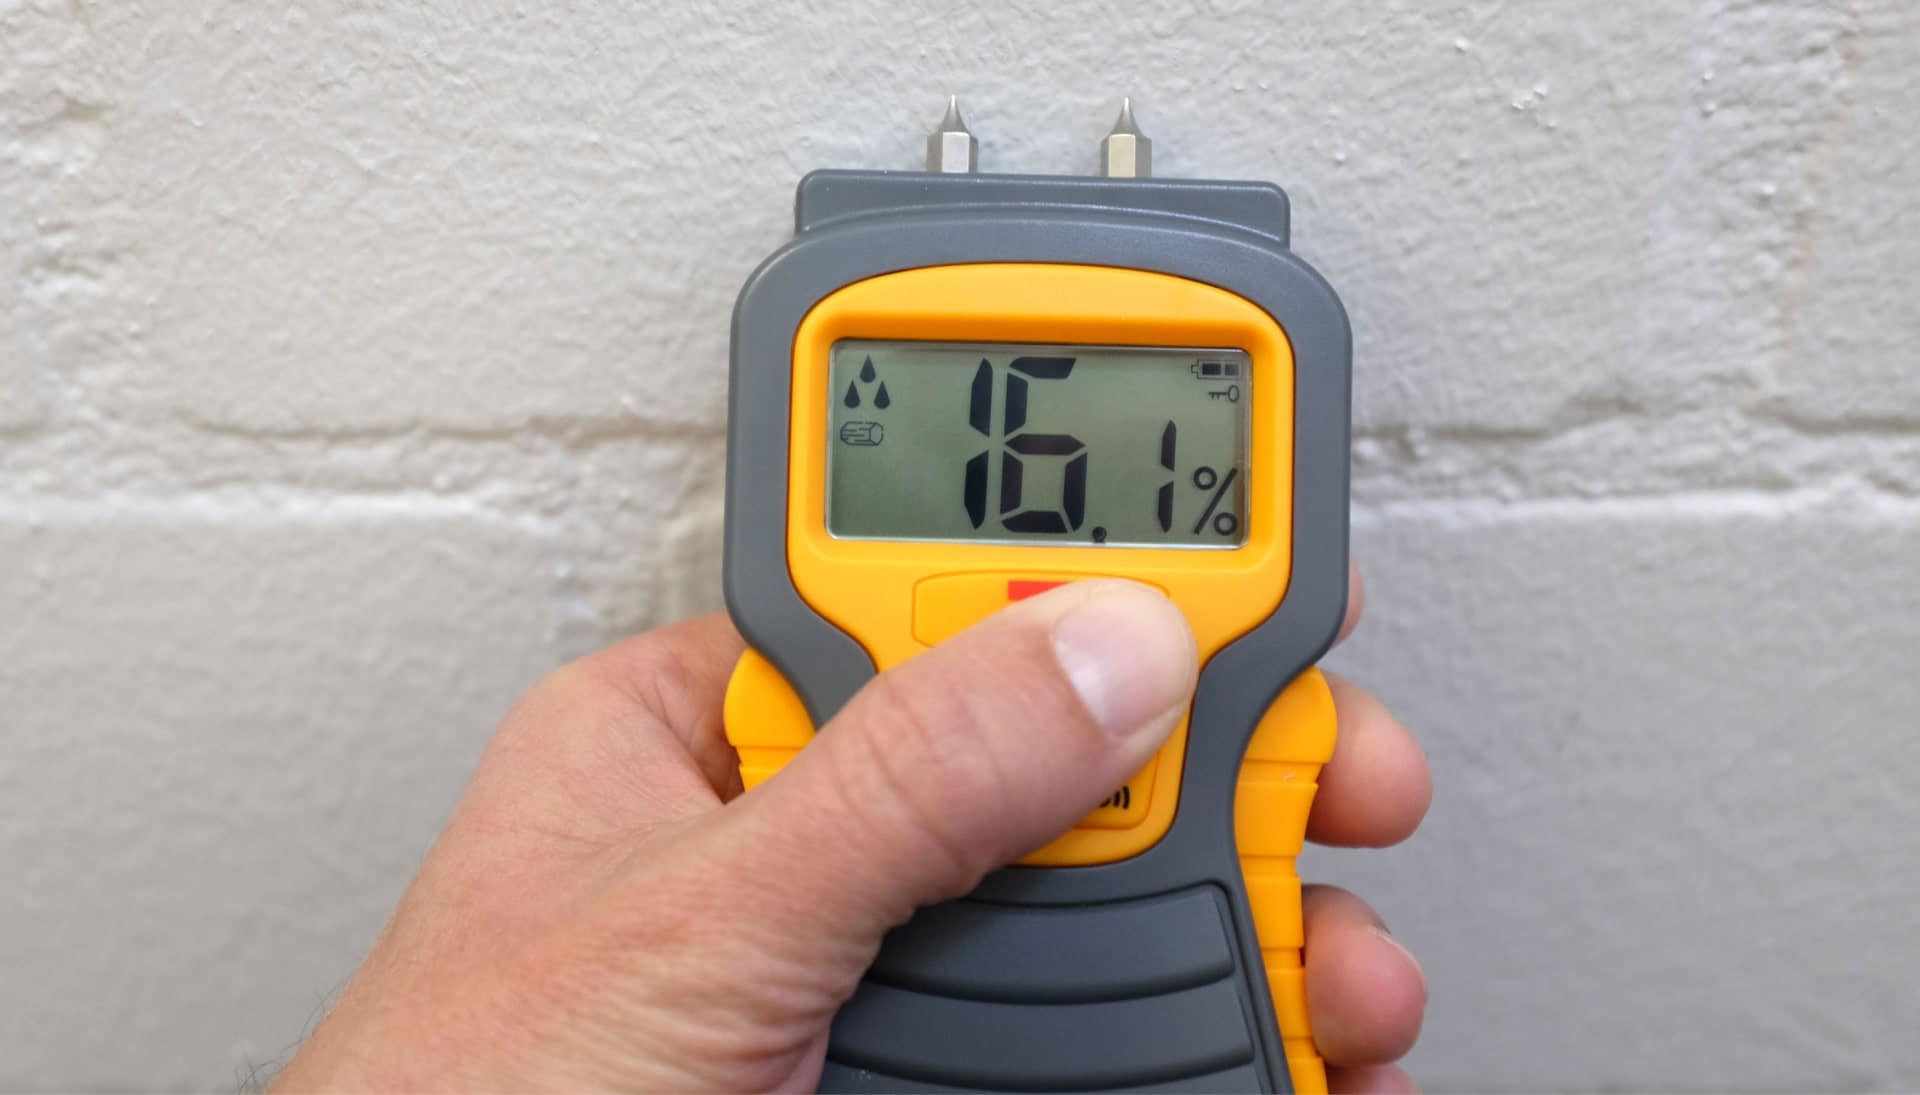 We provide fast, accurate, and affordable mold testing services in Portland, Oregon.